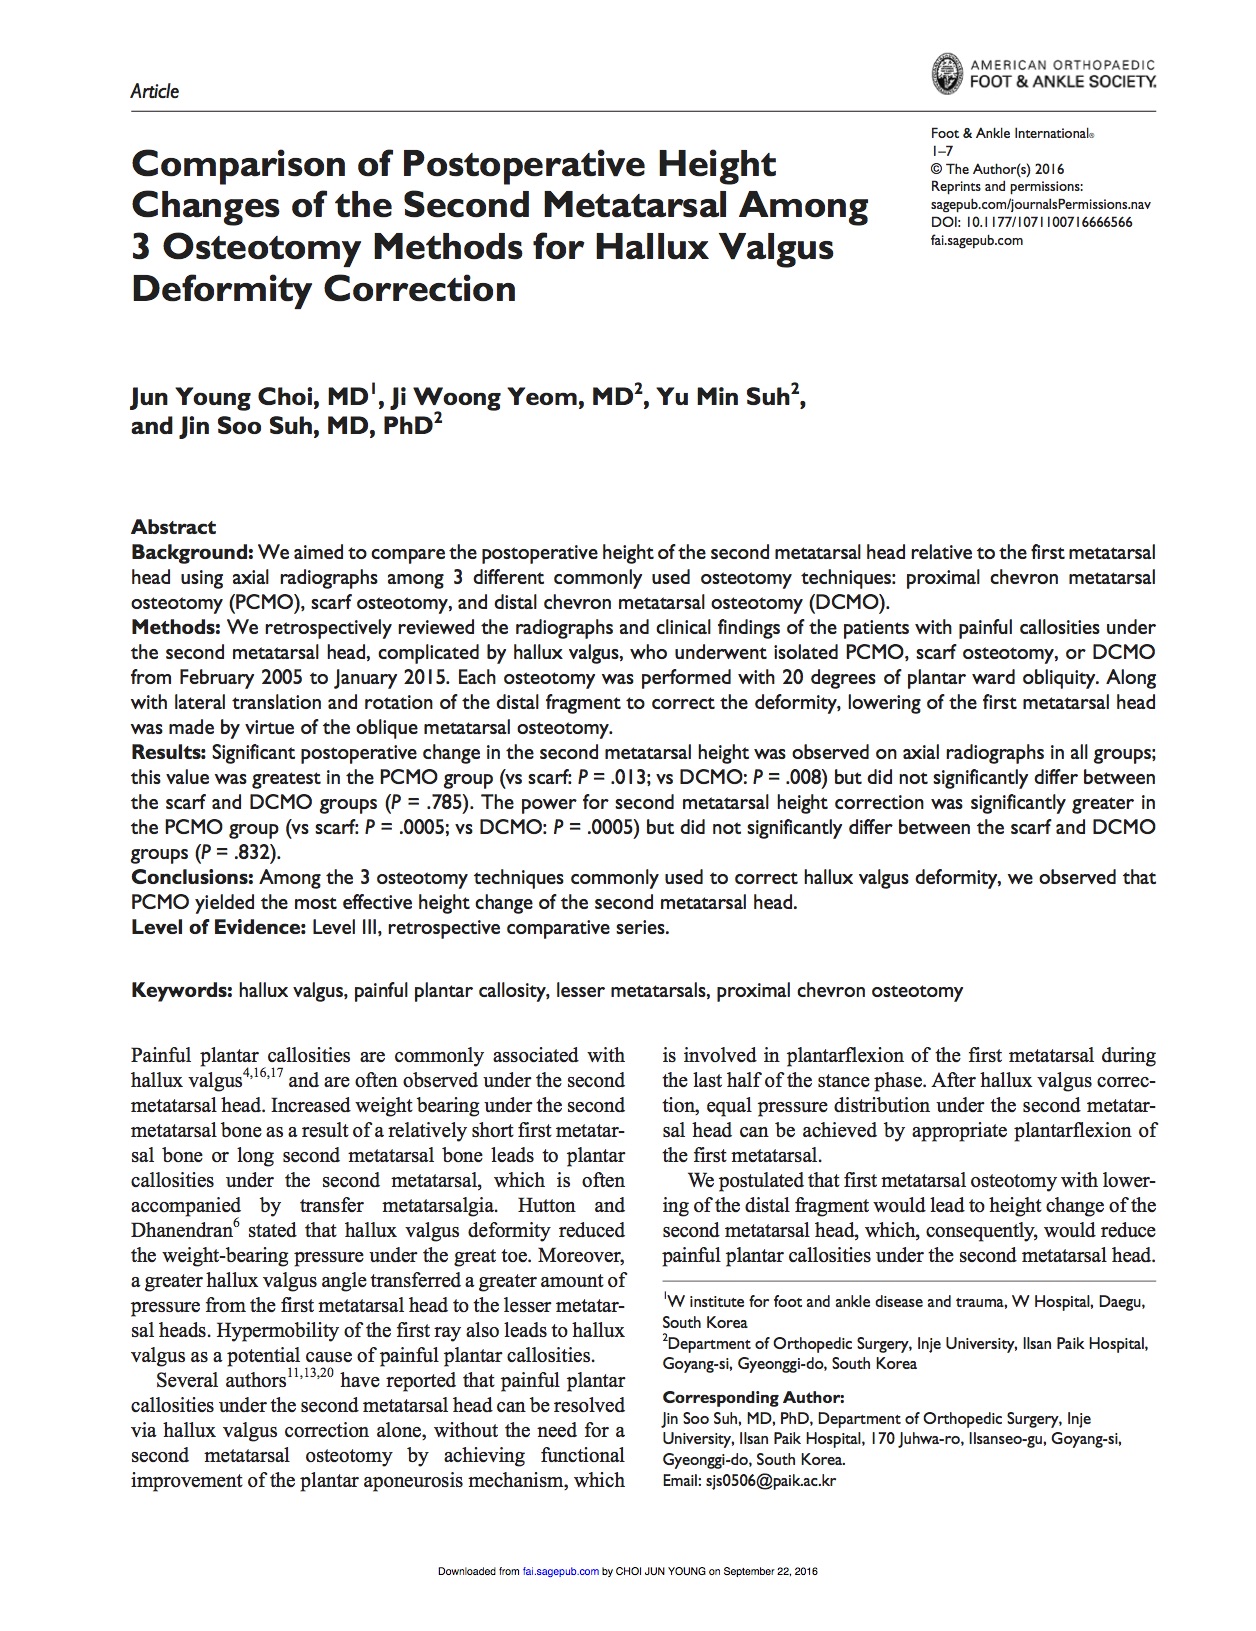 Comparison of Postoperative Height Changes of the Second Metatarsal Among 3 Osteotomy Methods for Hallux Valgus Deformity Correction(드래그함).jpg